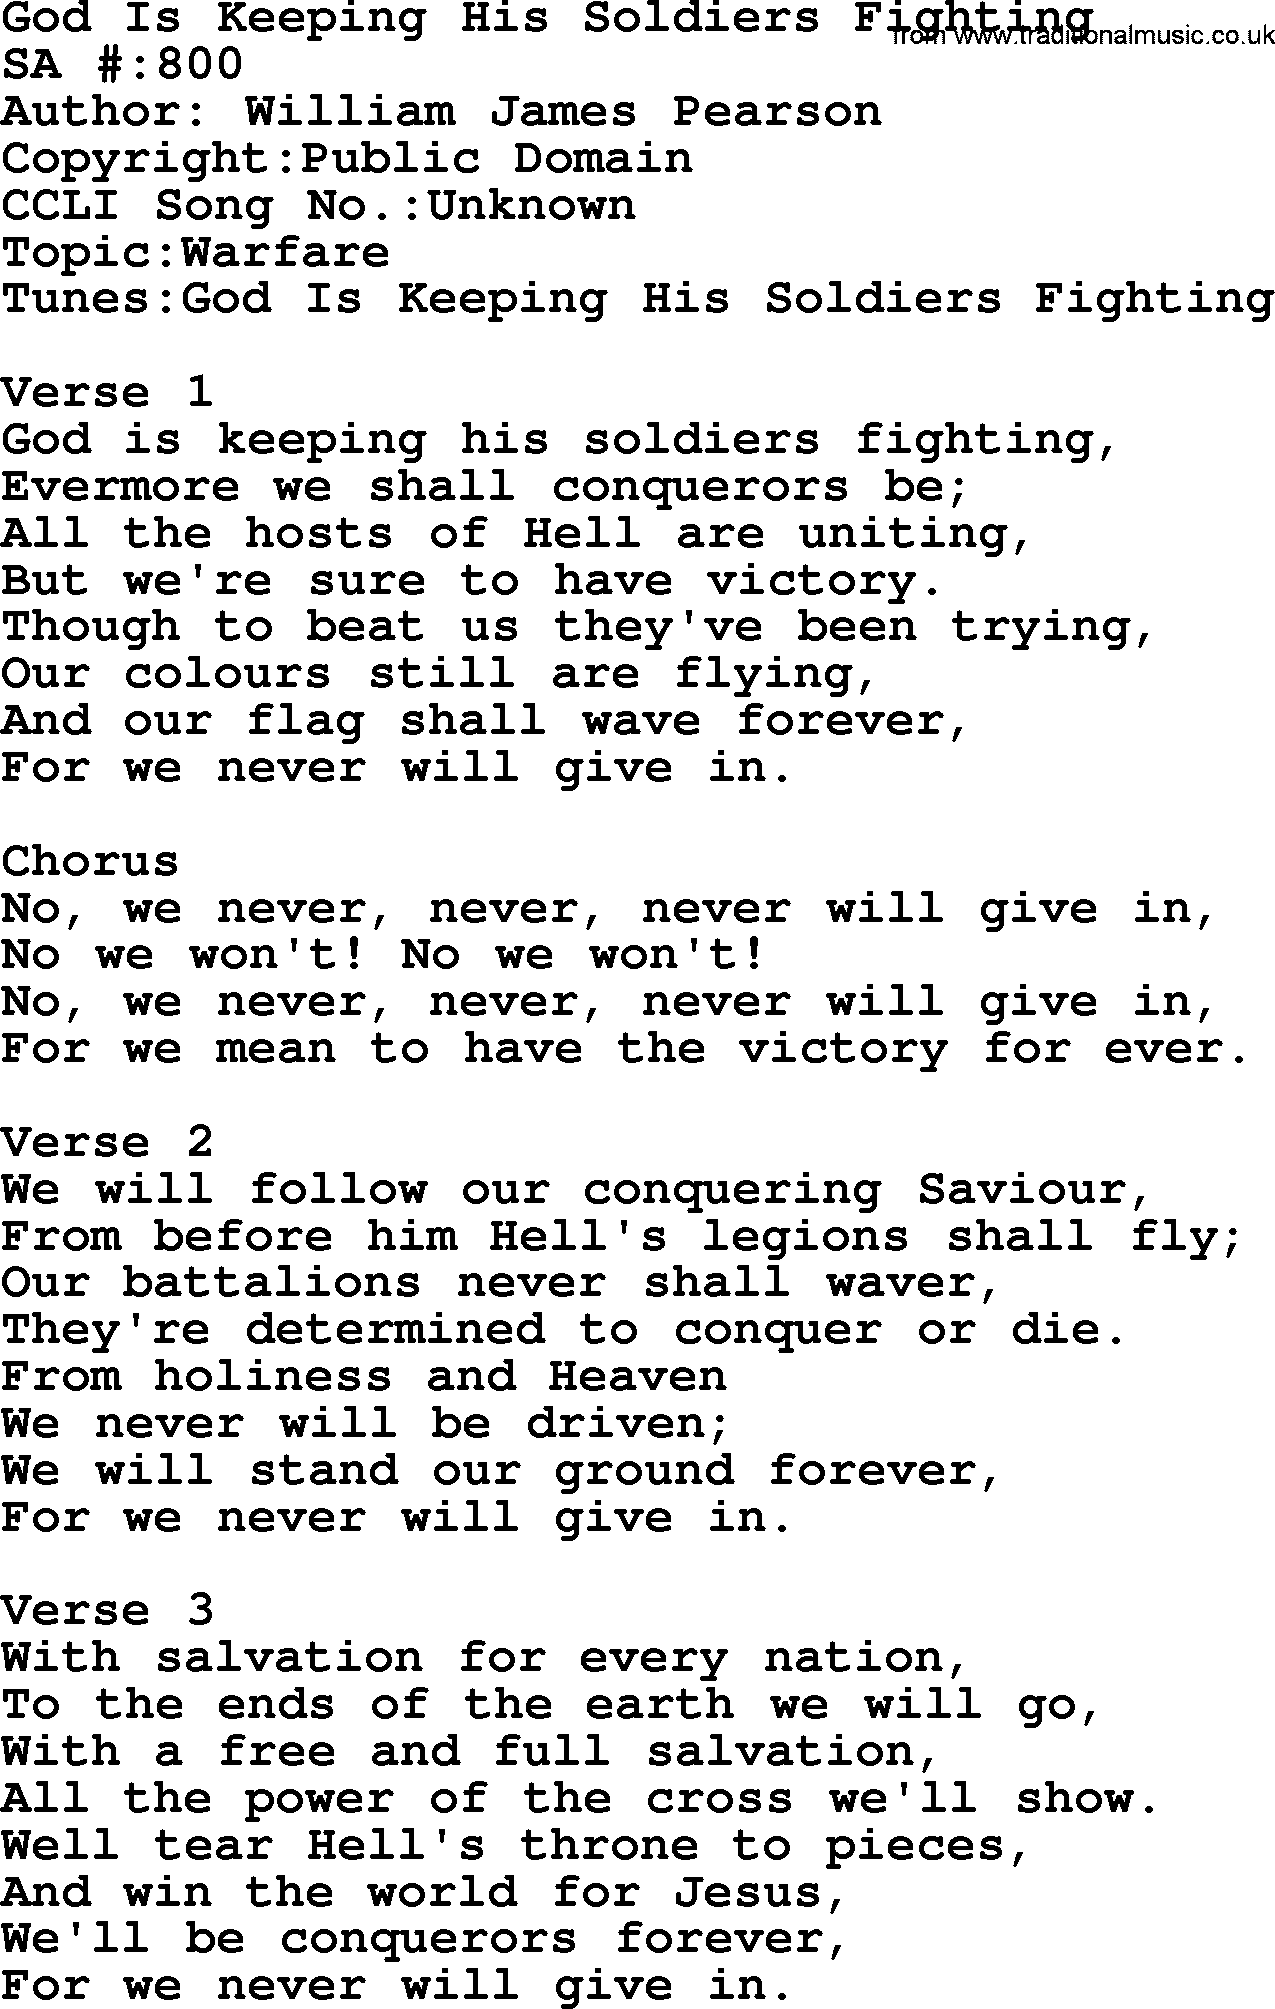 Salvation Army Hymnal, title: God Is Keeping His Soldiers Fighting, with lyrics and PDF,